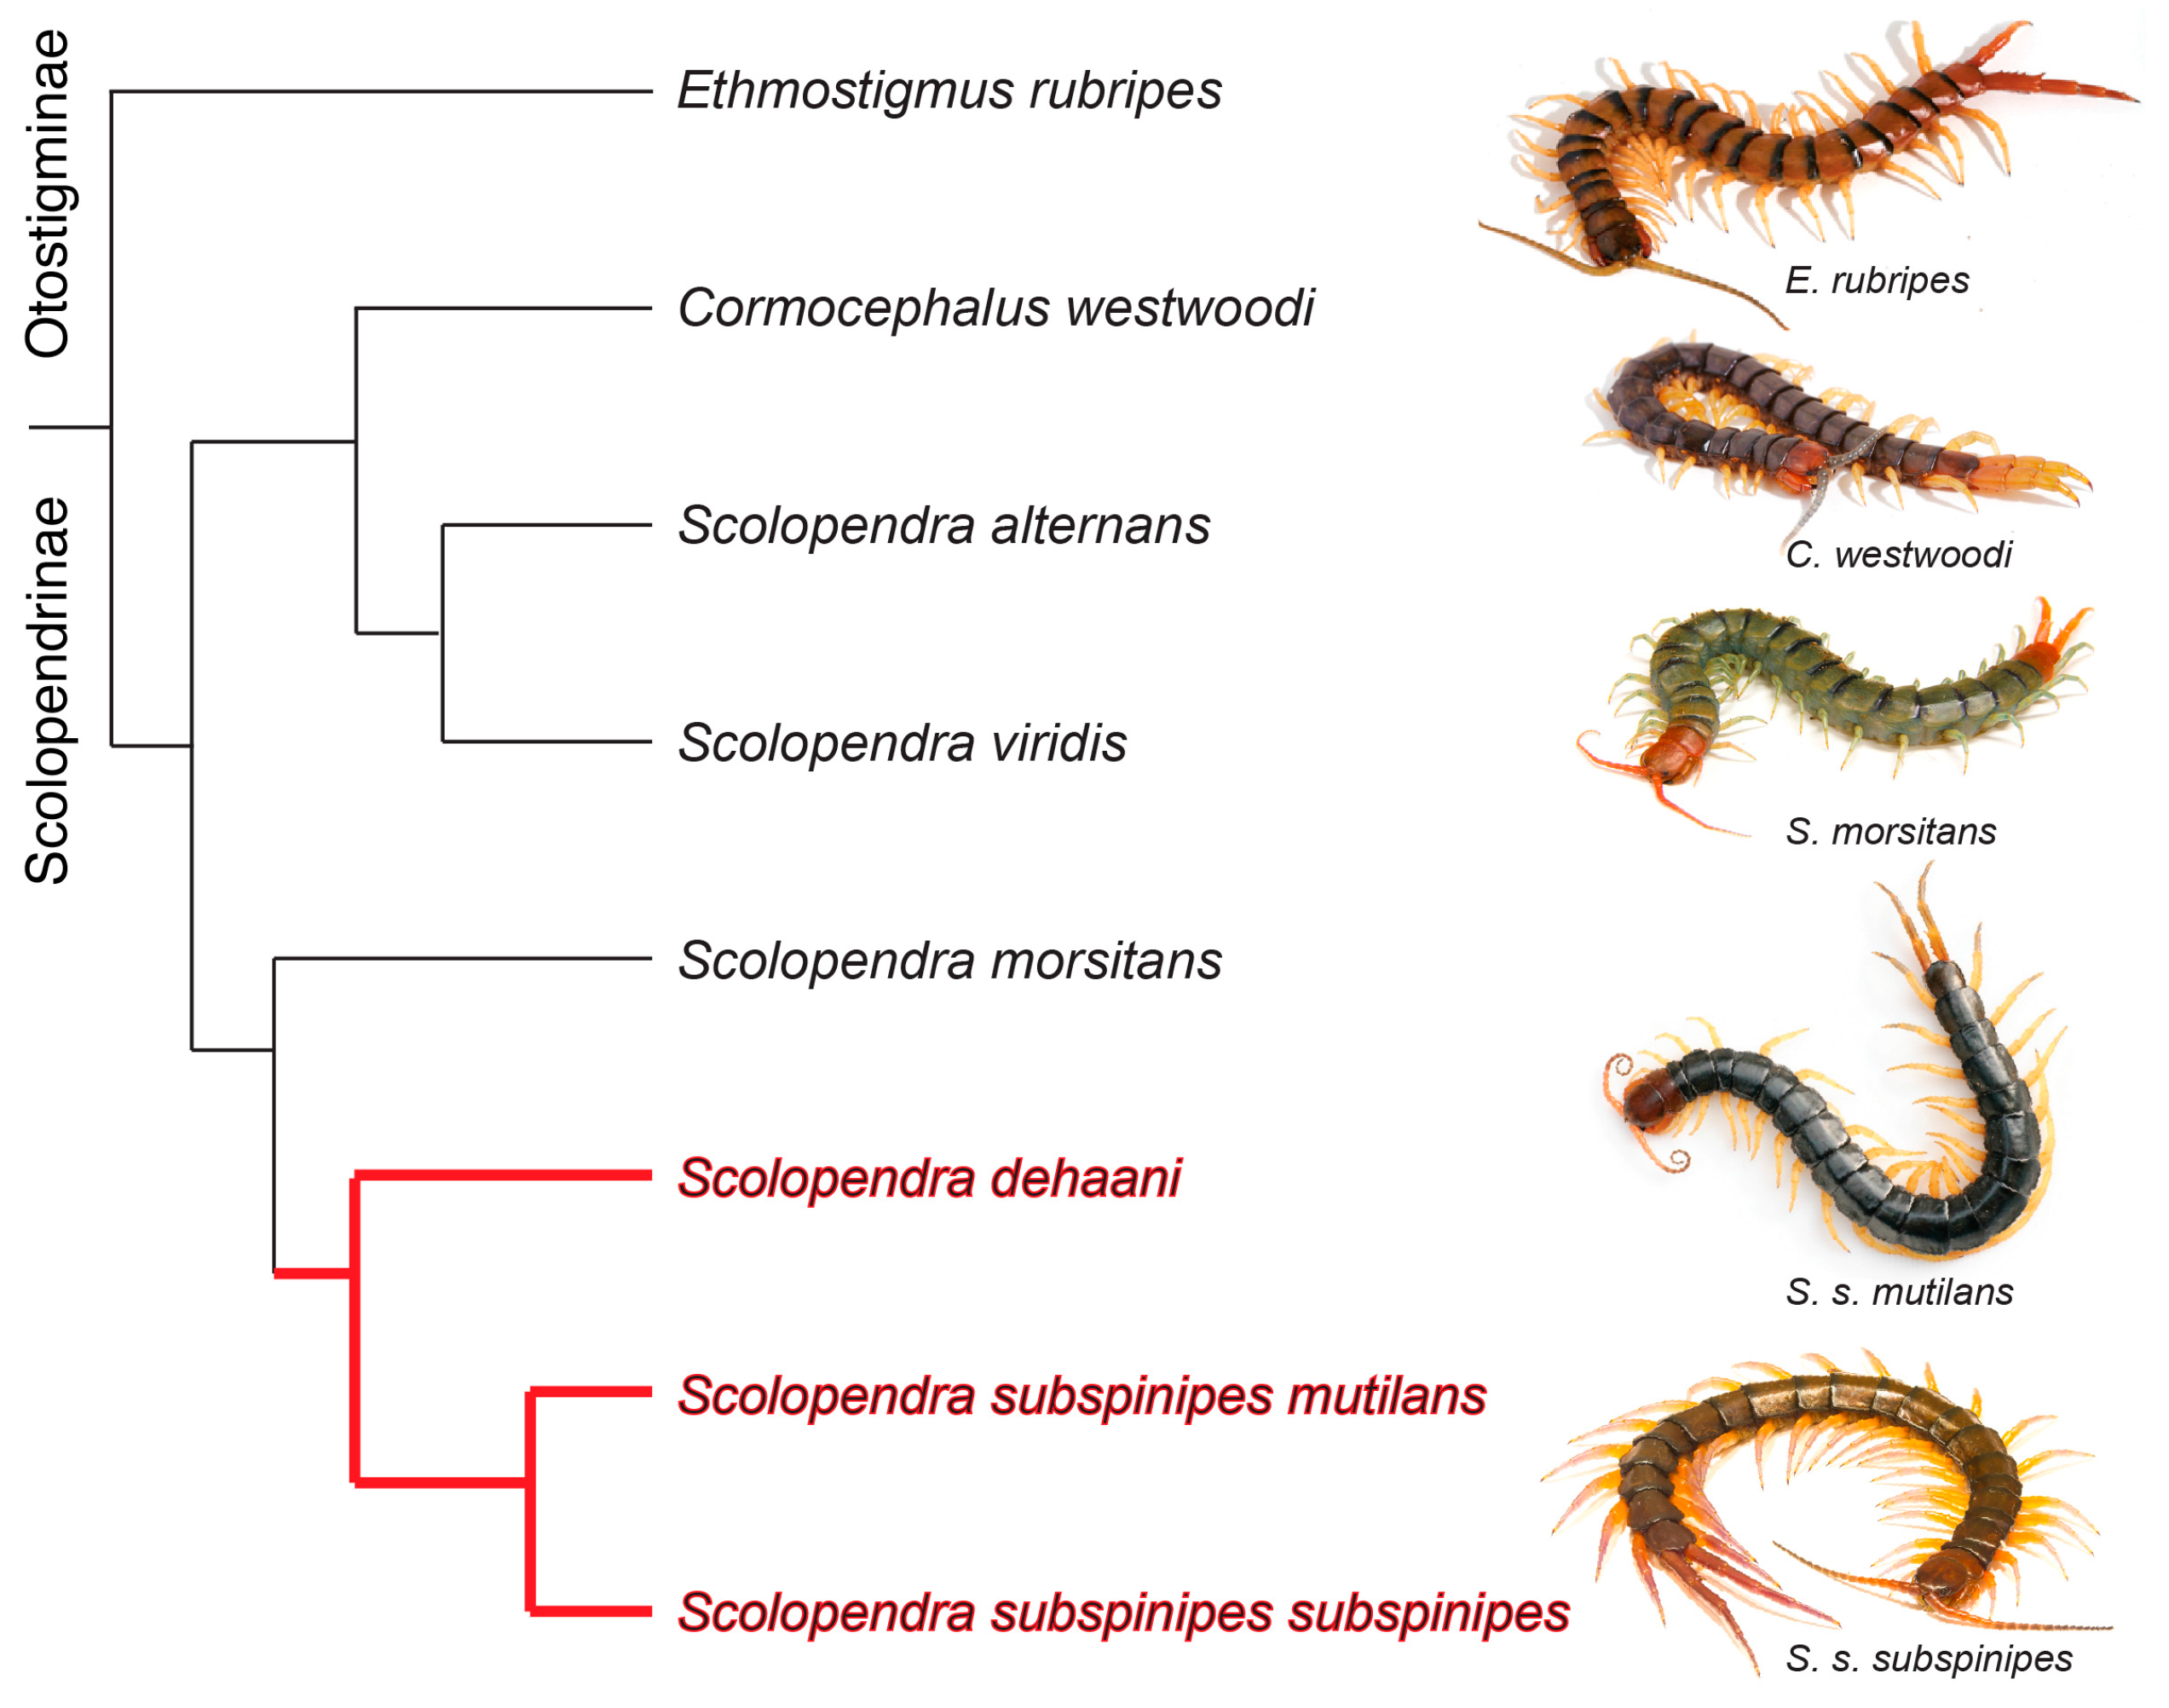 Toxins | Free Full-Text | True Lies: Using Proteomics to Assess the  Accuracy of Transcriptome-Based Venomics in Centipedes Uncovers False  Positives and Reveals Startling Intraspecific Variation in Scolopendra  subspinipes